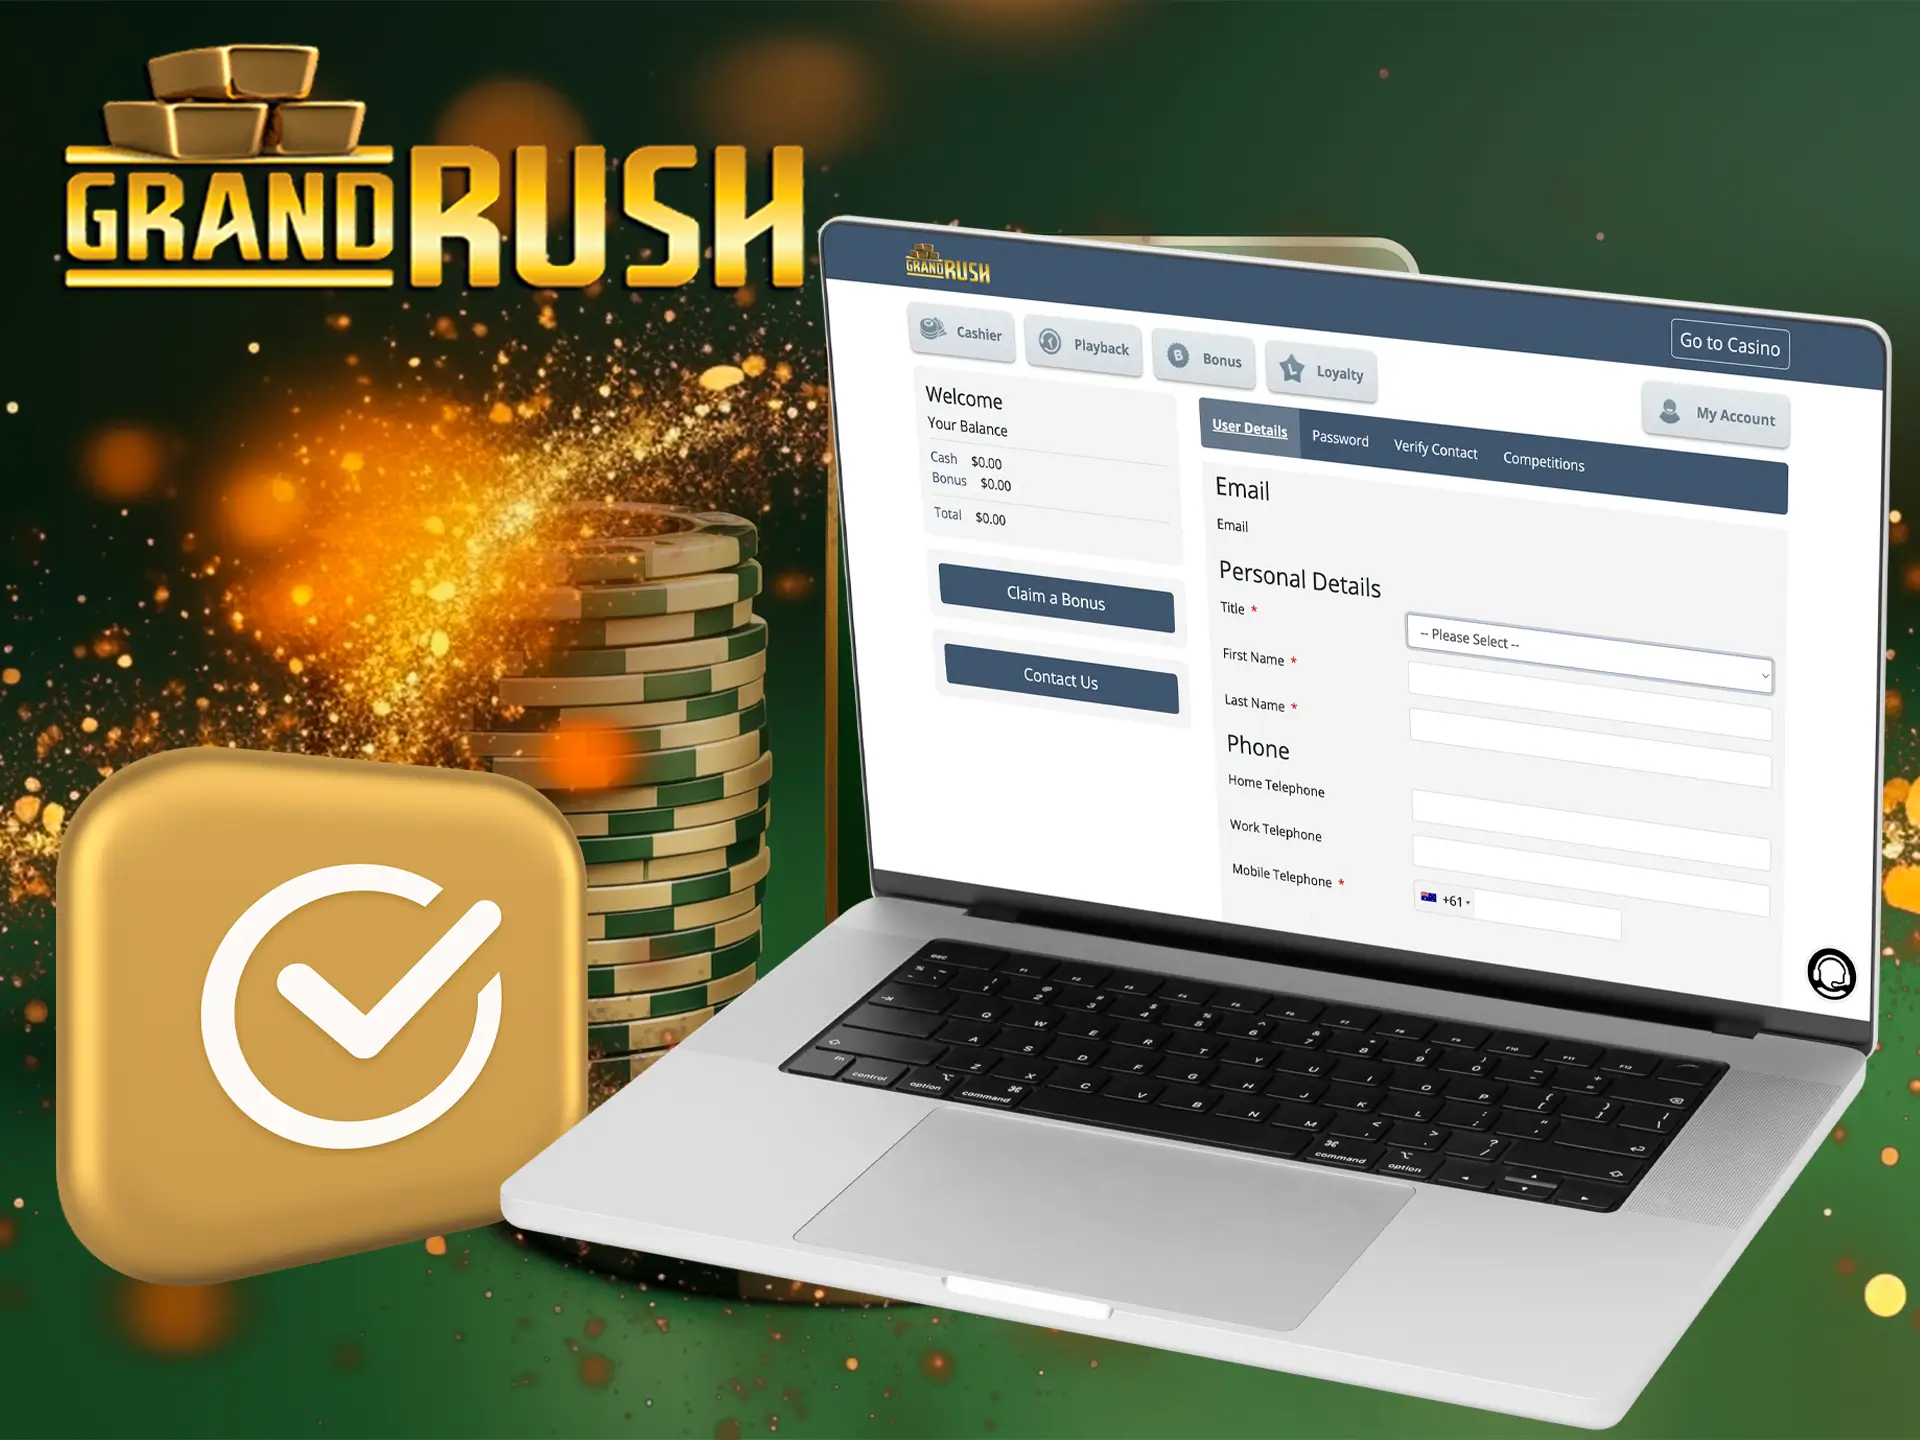 Verify your Grand Rush account to get all the features the casino offers.